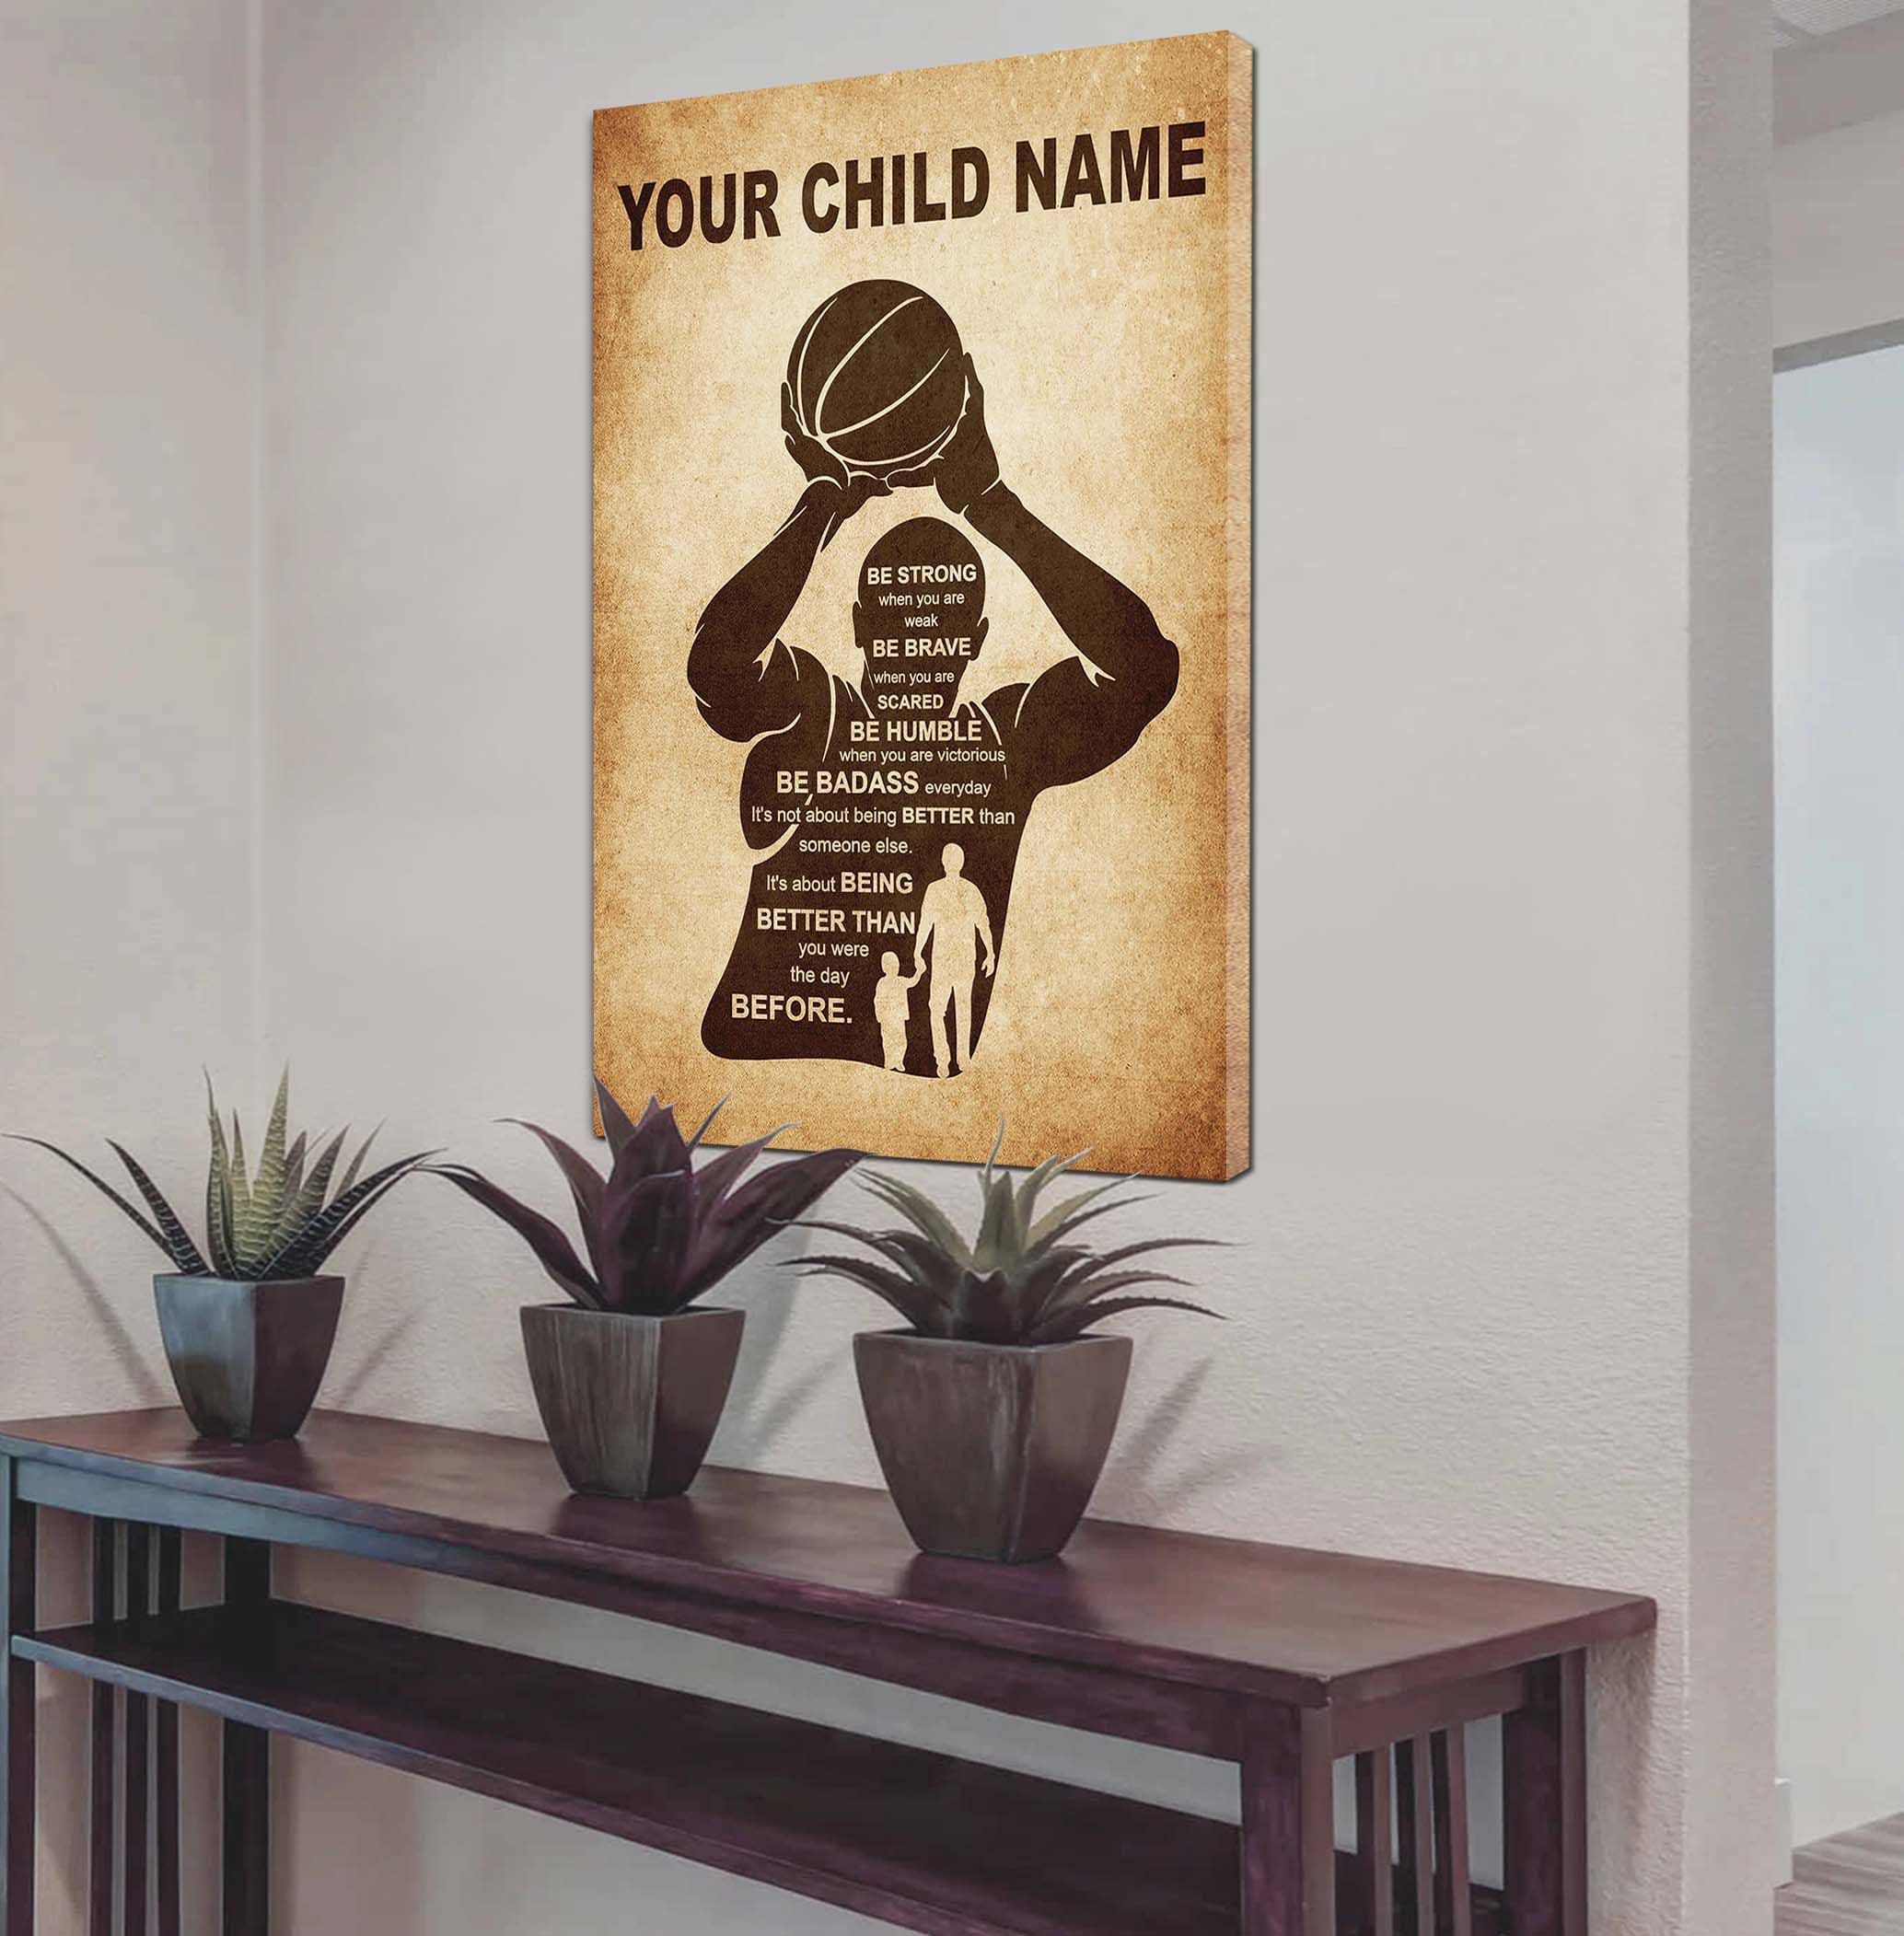 American Football Personalized Your Child Name From Dad To Son Basketball Poster Canvas Be Strong When You Are Weak Be Brave When You Are Scared It's Not About Being Better Than Someone Else It's About Being Better Than You Were The Day Before